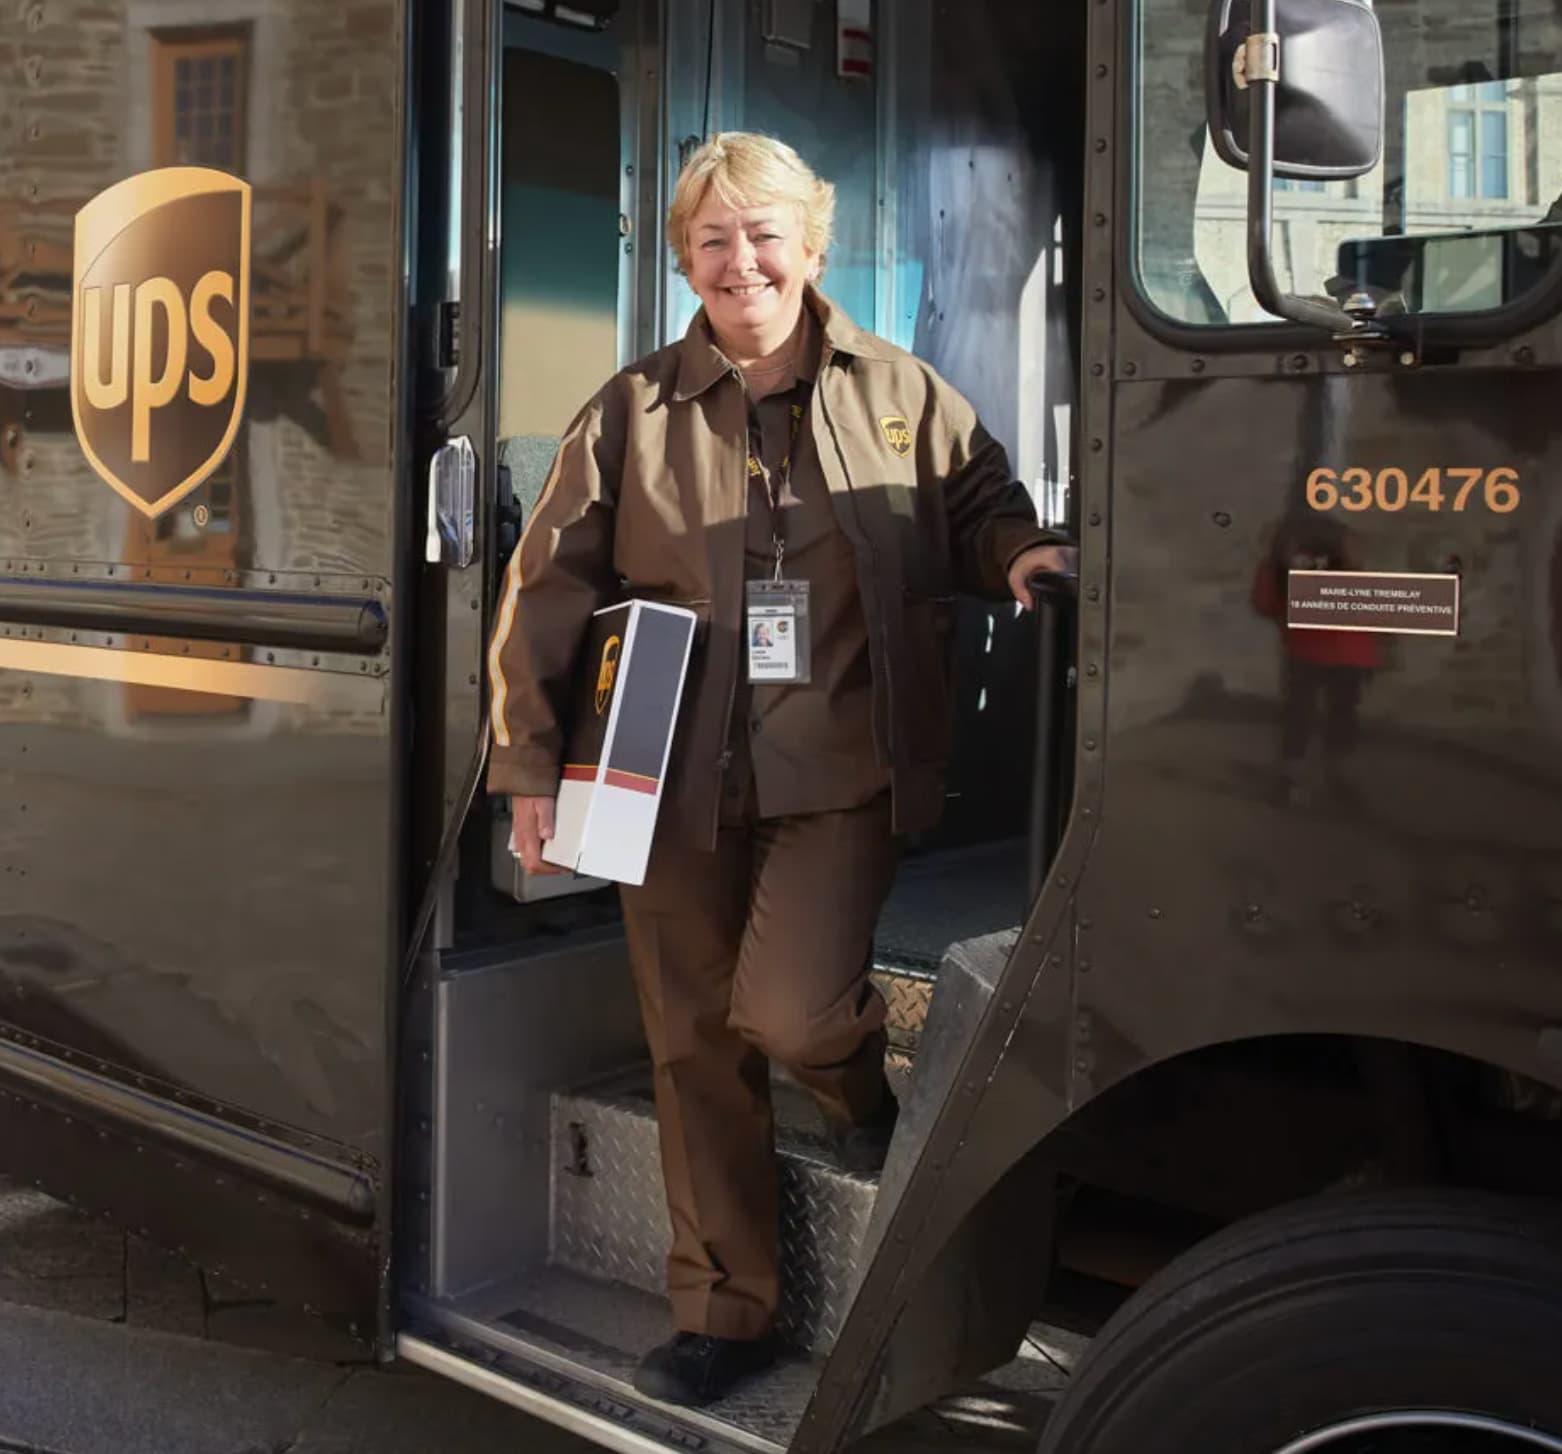 ups delivery driver